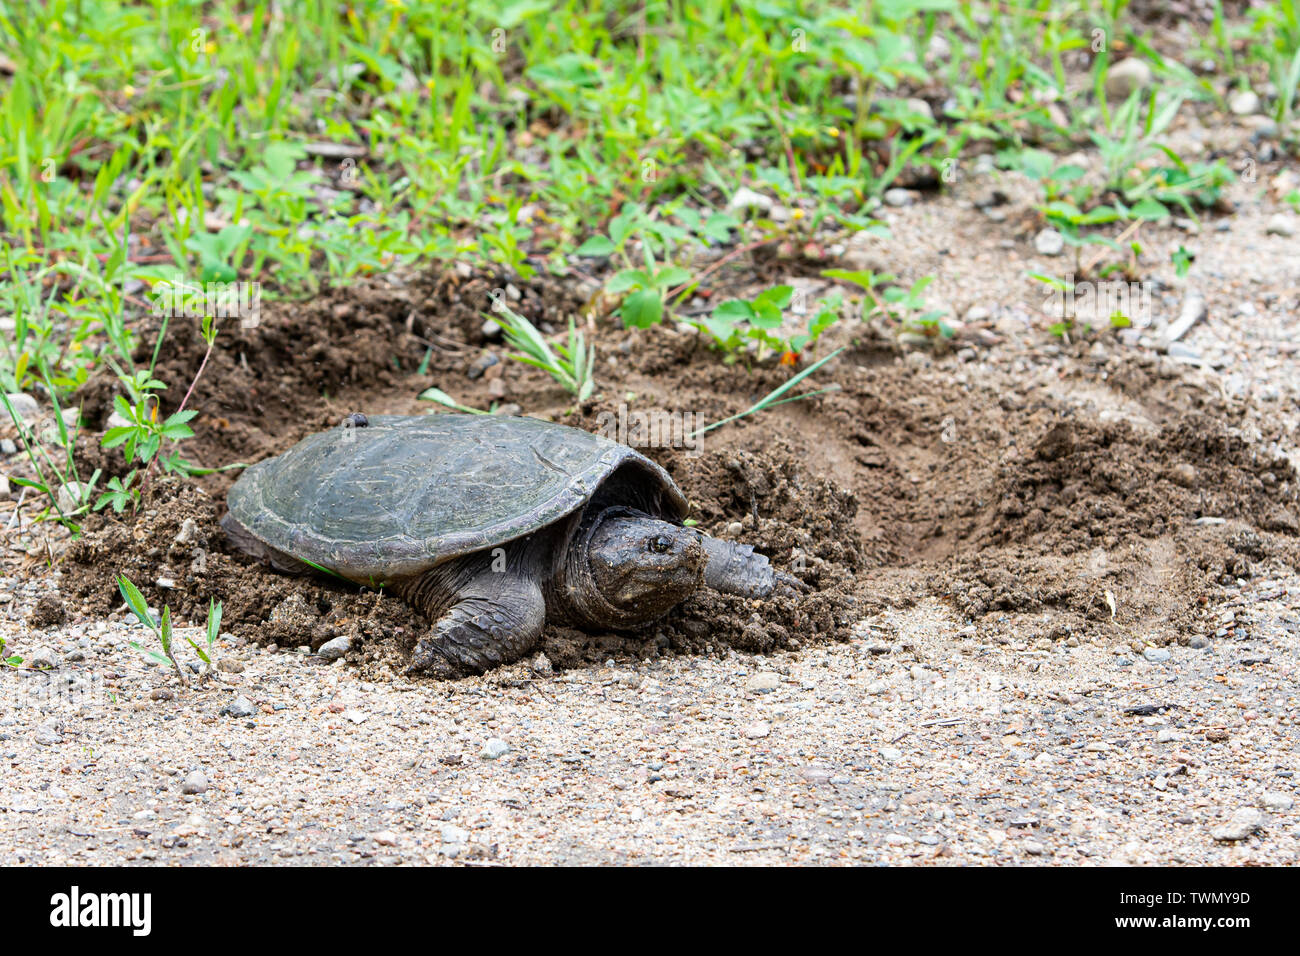 A snapping turtle digging a hole in the dirt to lay eggs in the Adirondack Mountains, NY USA Stock Photo